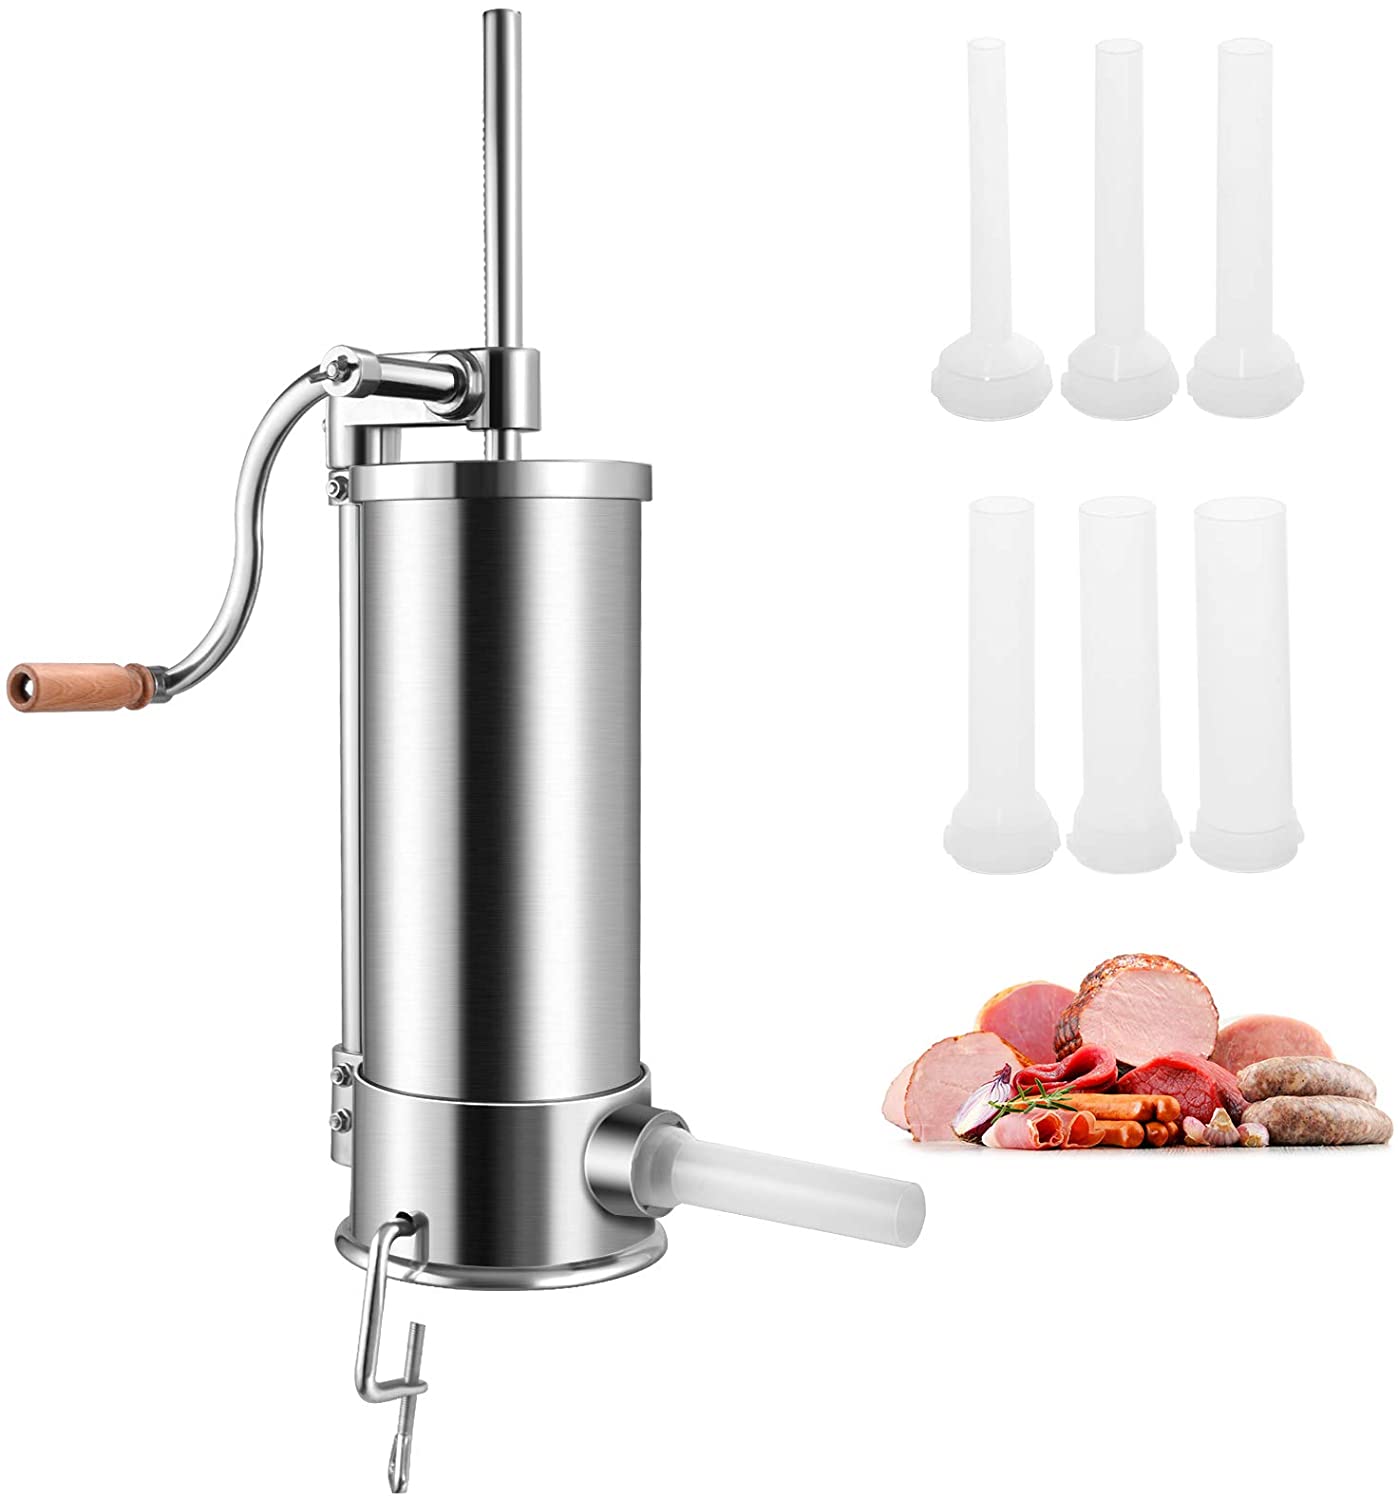 GOPLUS Sausage Filler Made of Stainless Steel, Sausage Filling Machine, Manual, Sausage Press with 4 Different Filling Tubes, Sausage Syringe with Attachment Clip, Easy to Use and Easy to Clean (6L)